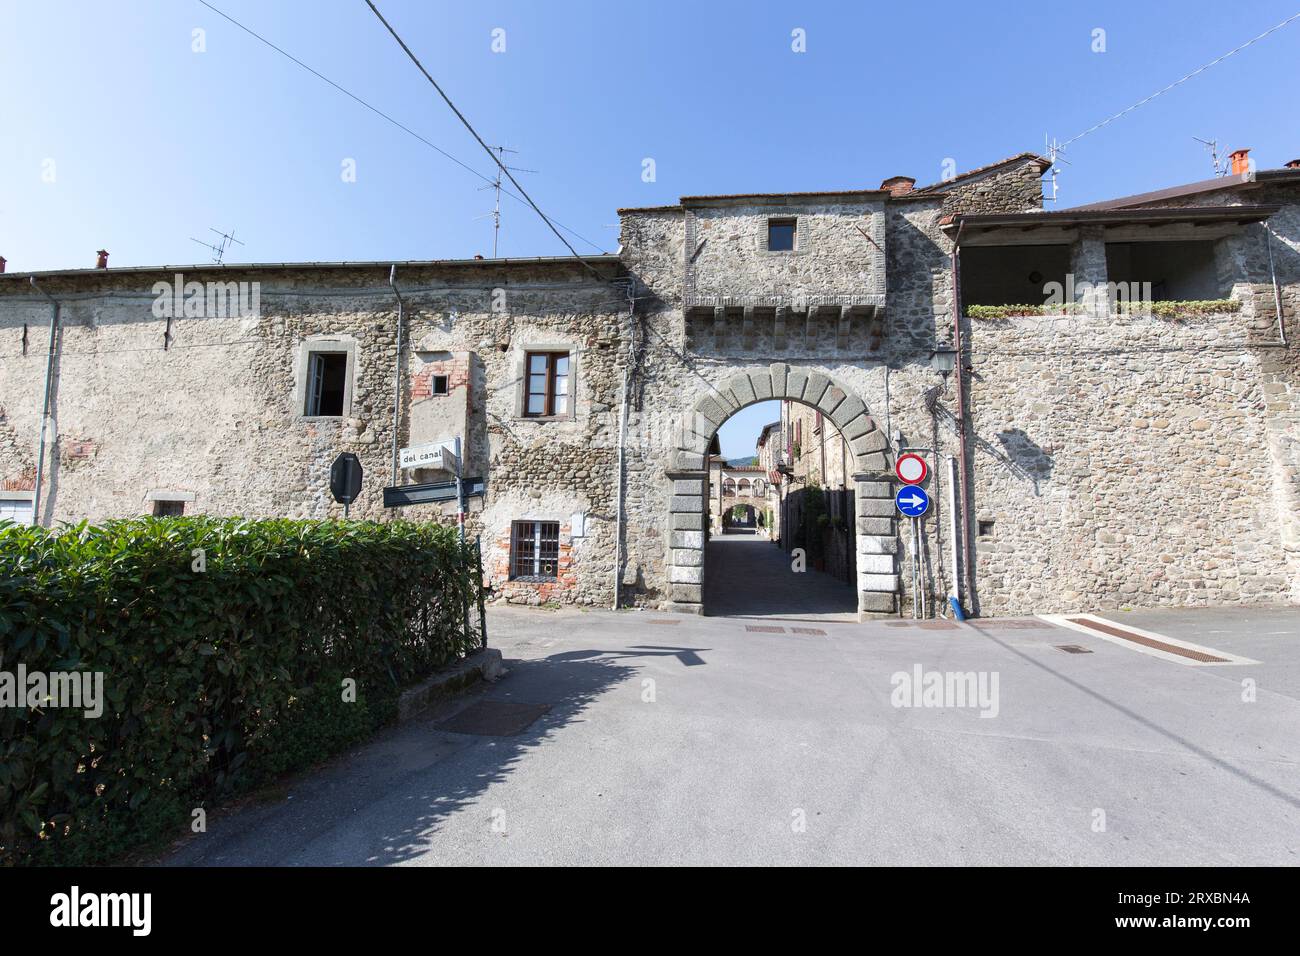 Filetto, Italy - August 14, 2020: view of ancient town Filetto in Lunigiana Stock Photo